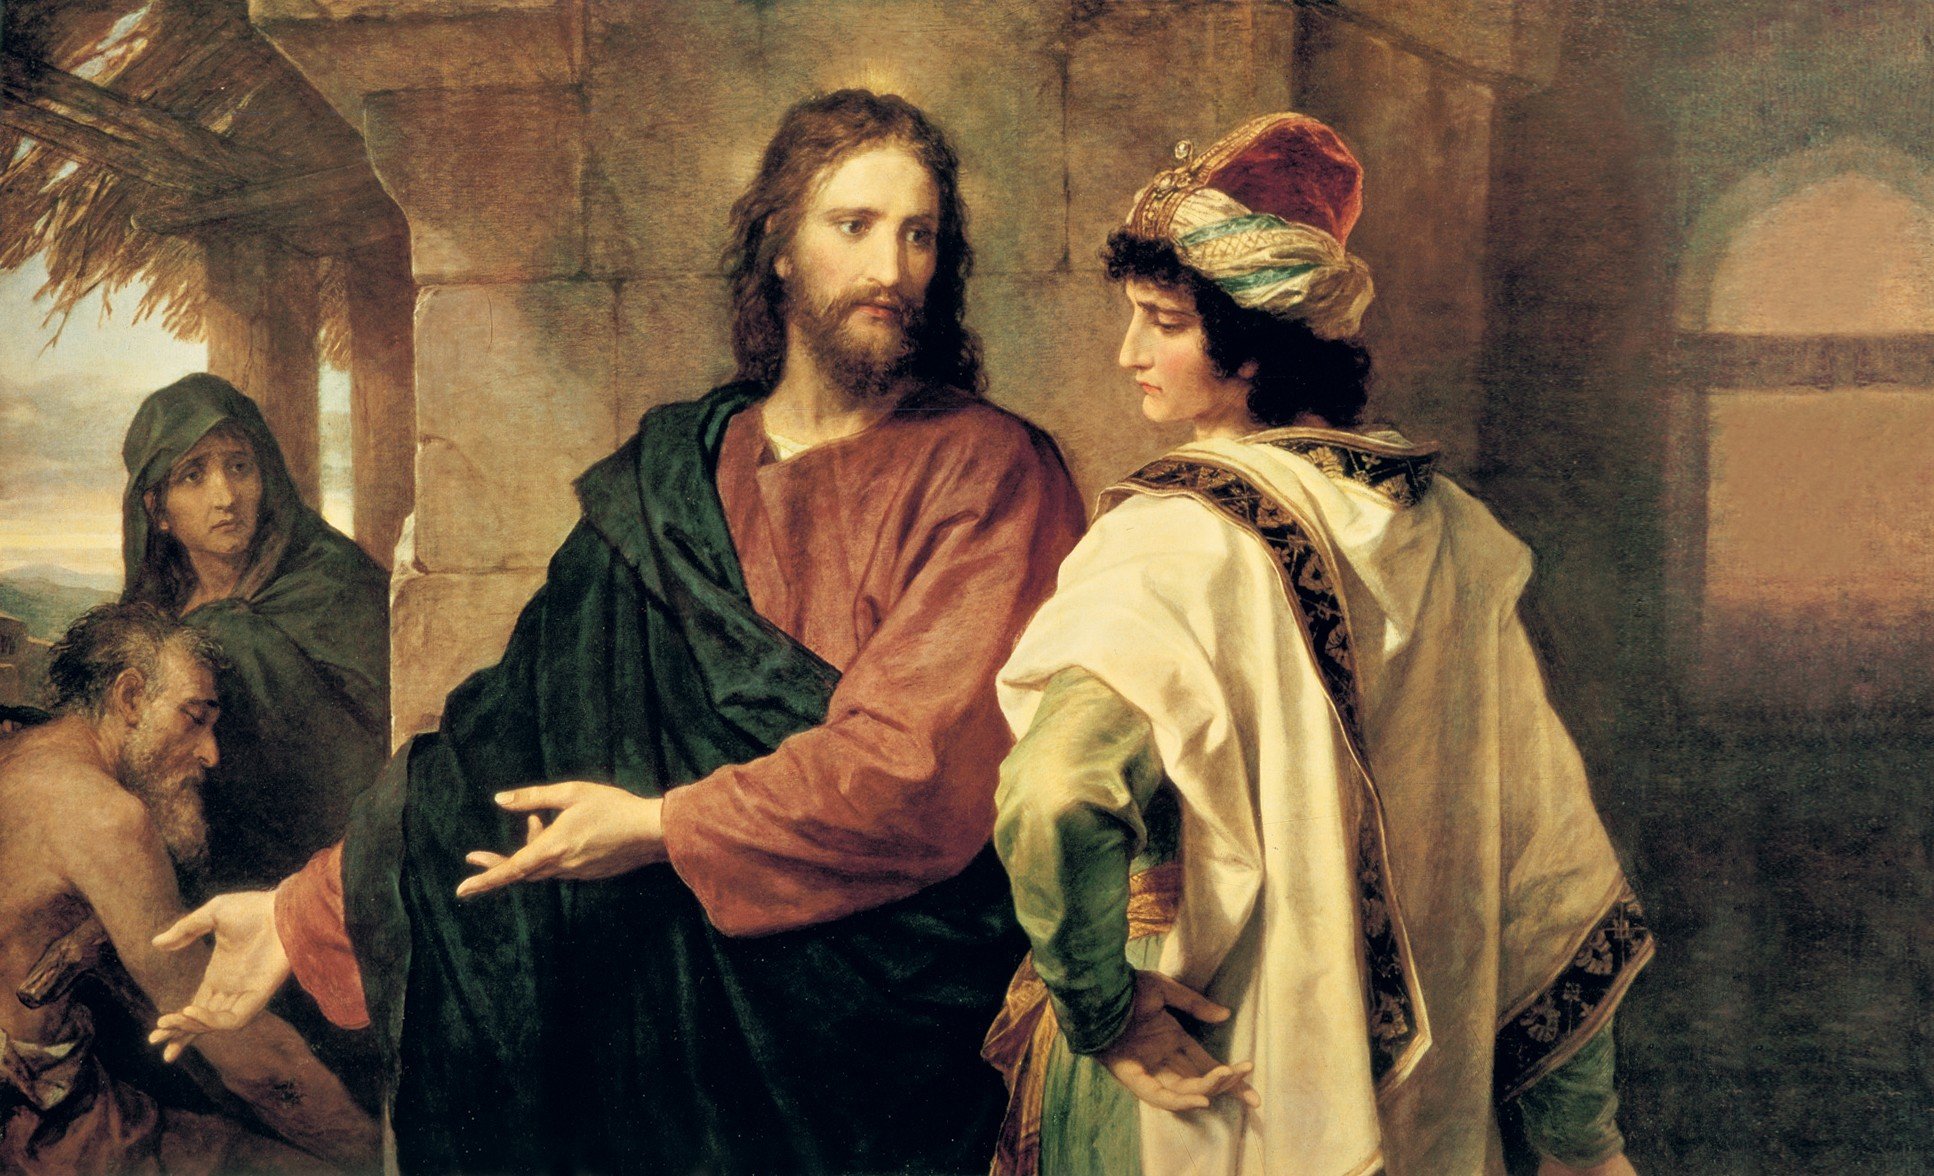 Called to Share "Christ and the Rich Young Ruler," by Heinrich Hofmann